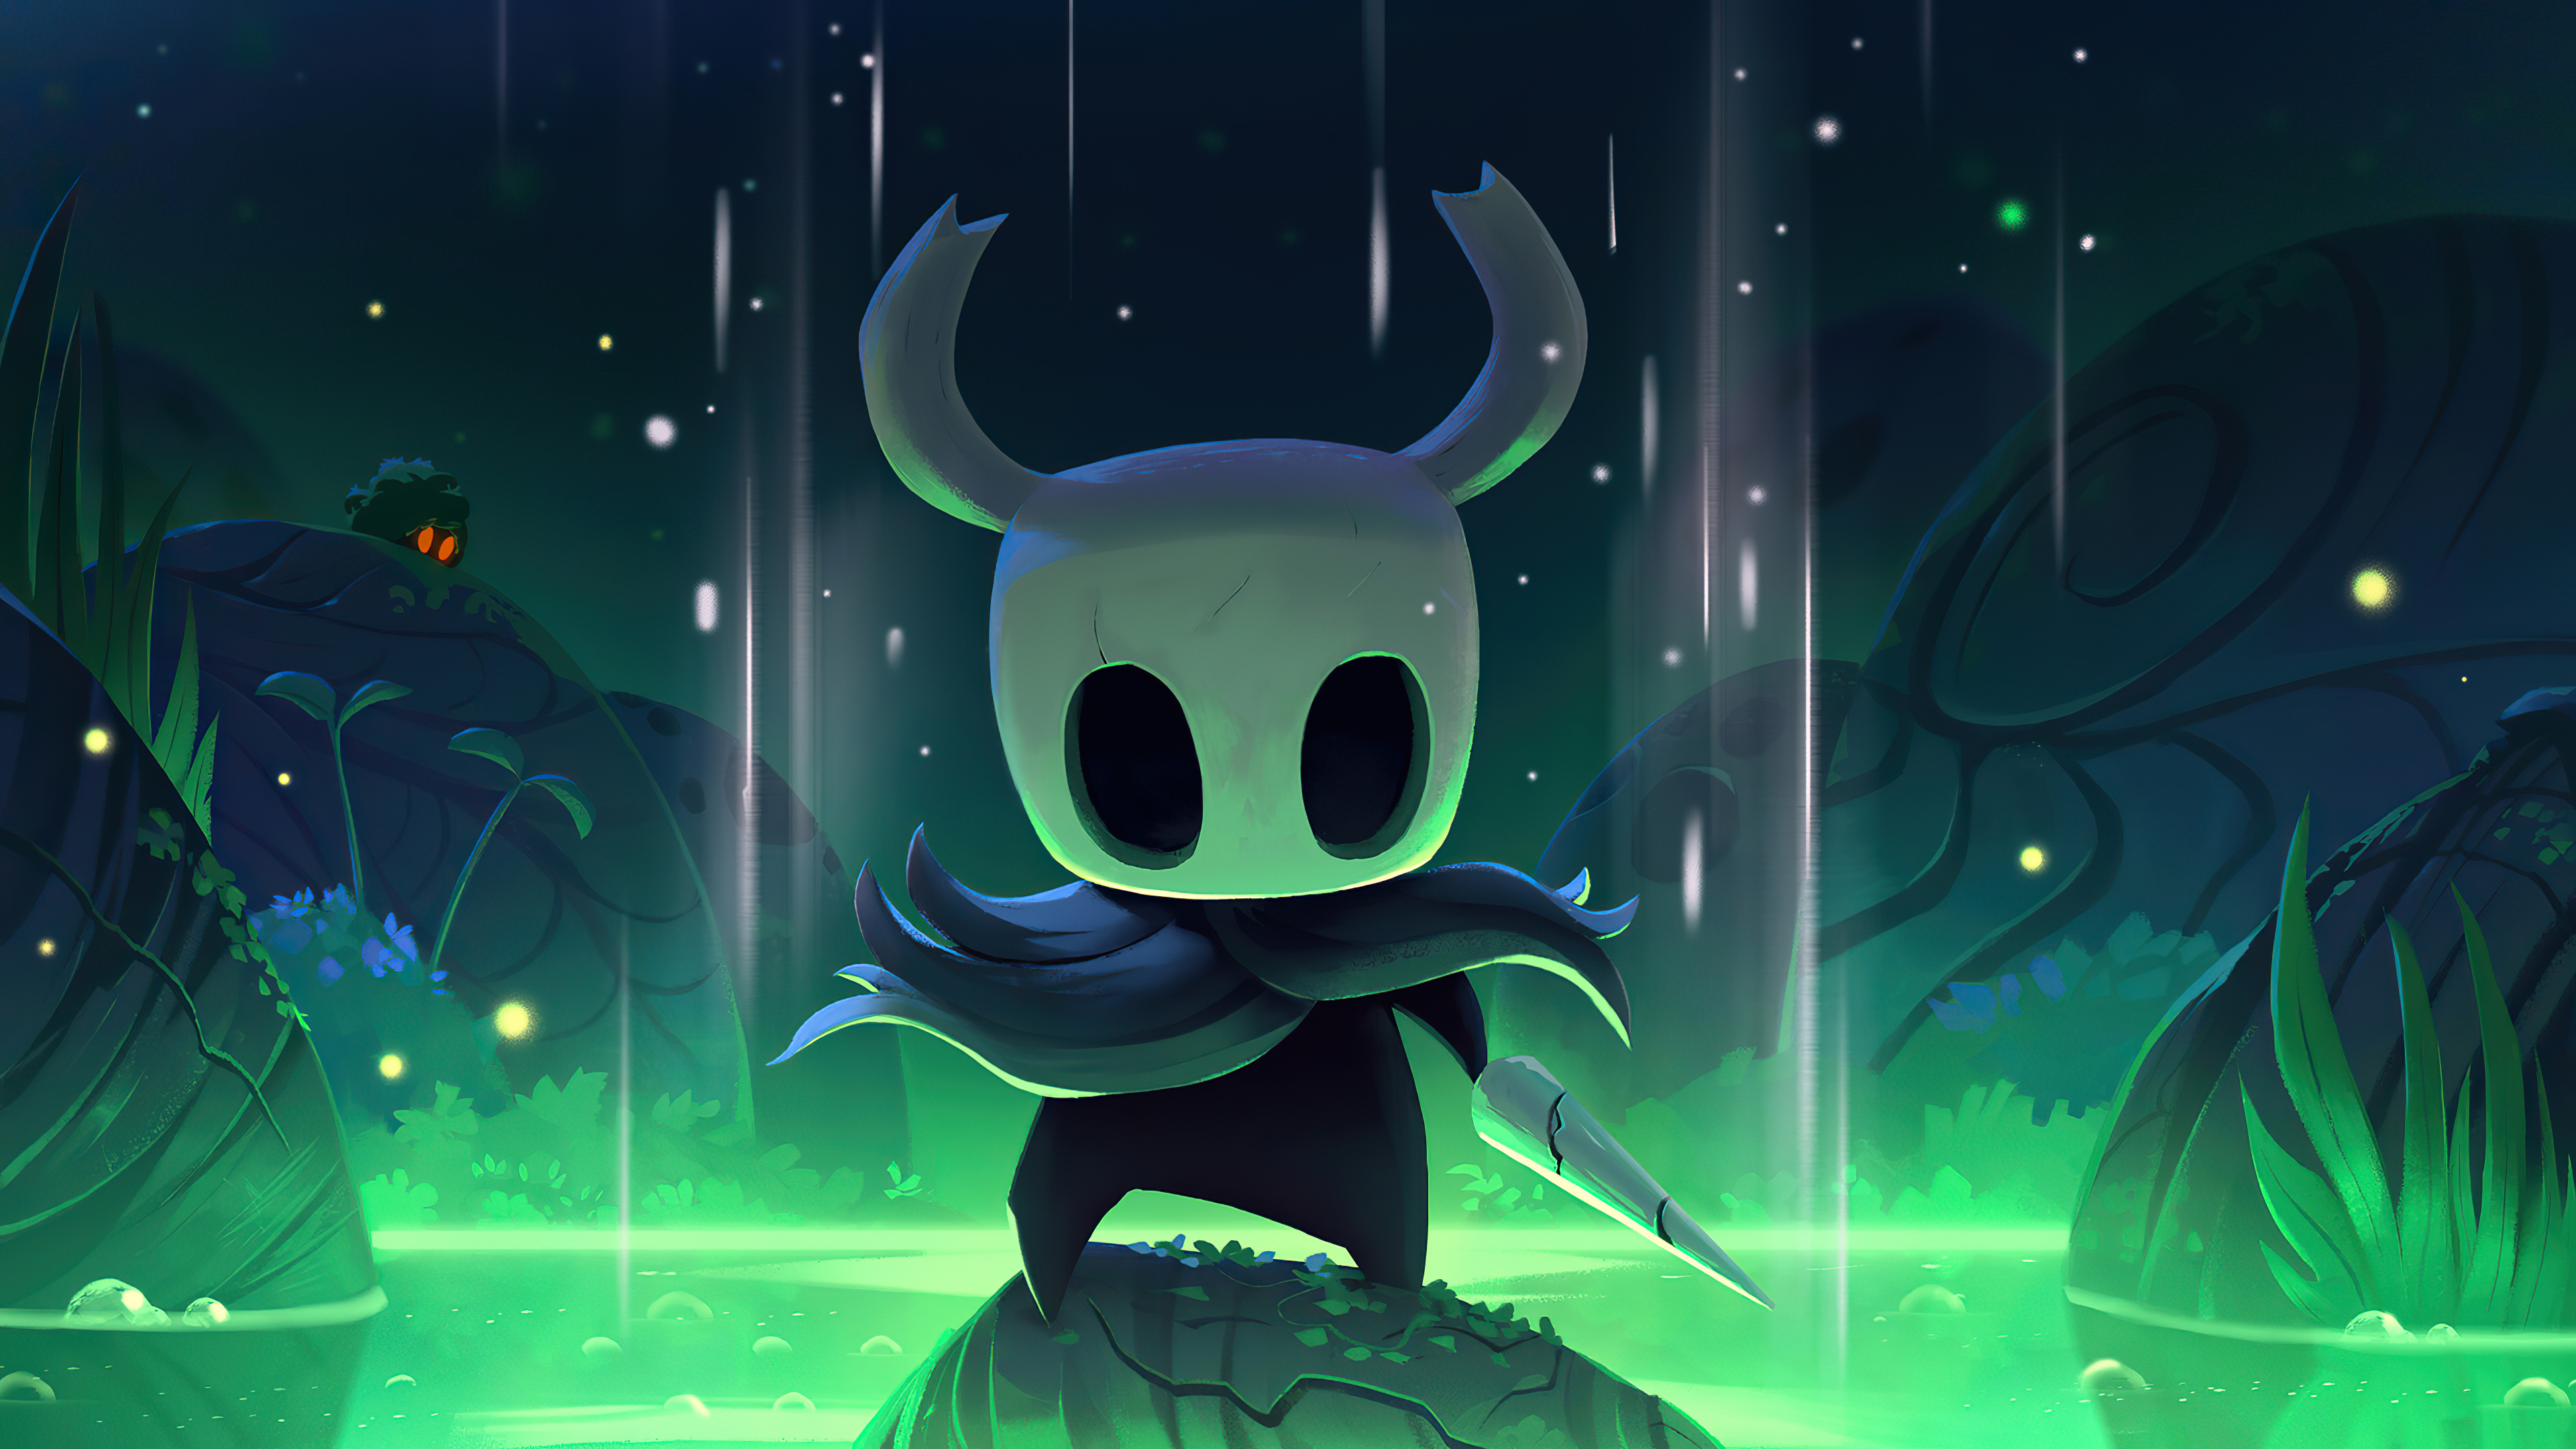 33 Hollow Knight ideas iPhone Wallpapers Free Download